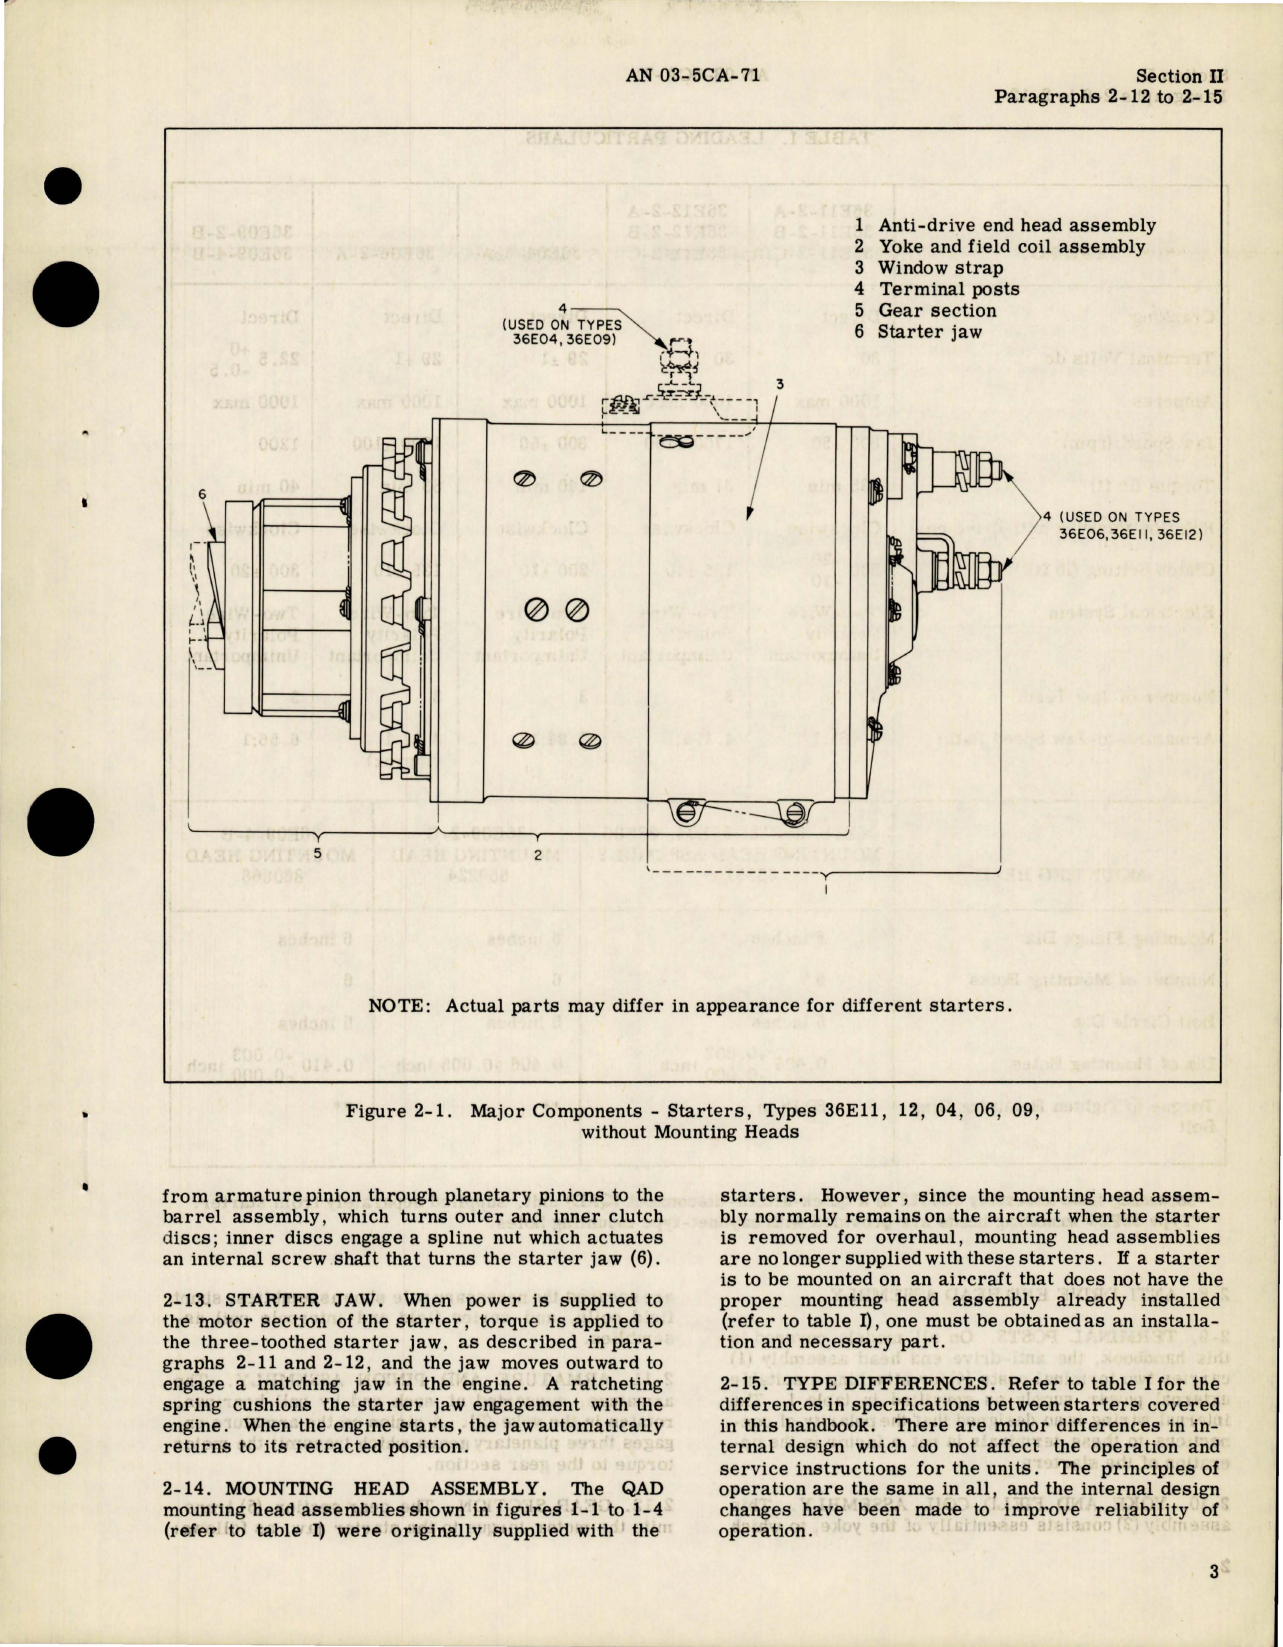 Sample page 7 from AirCorps Library document: Operation and Service Instructions for Starters 